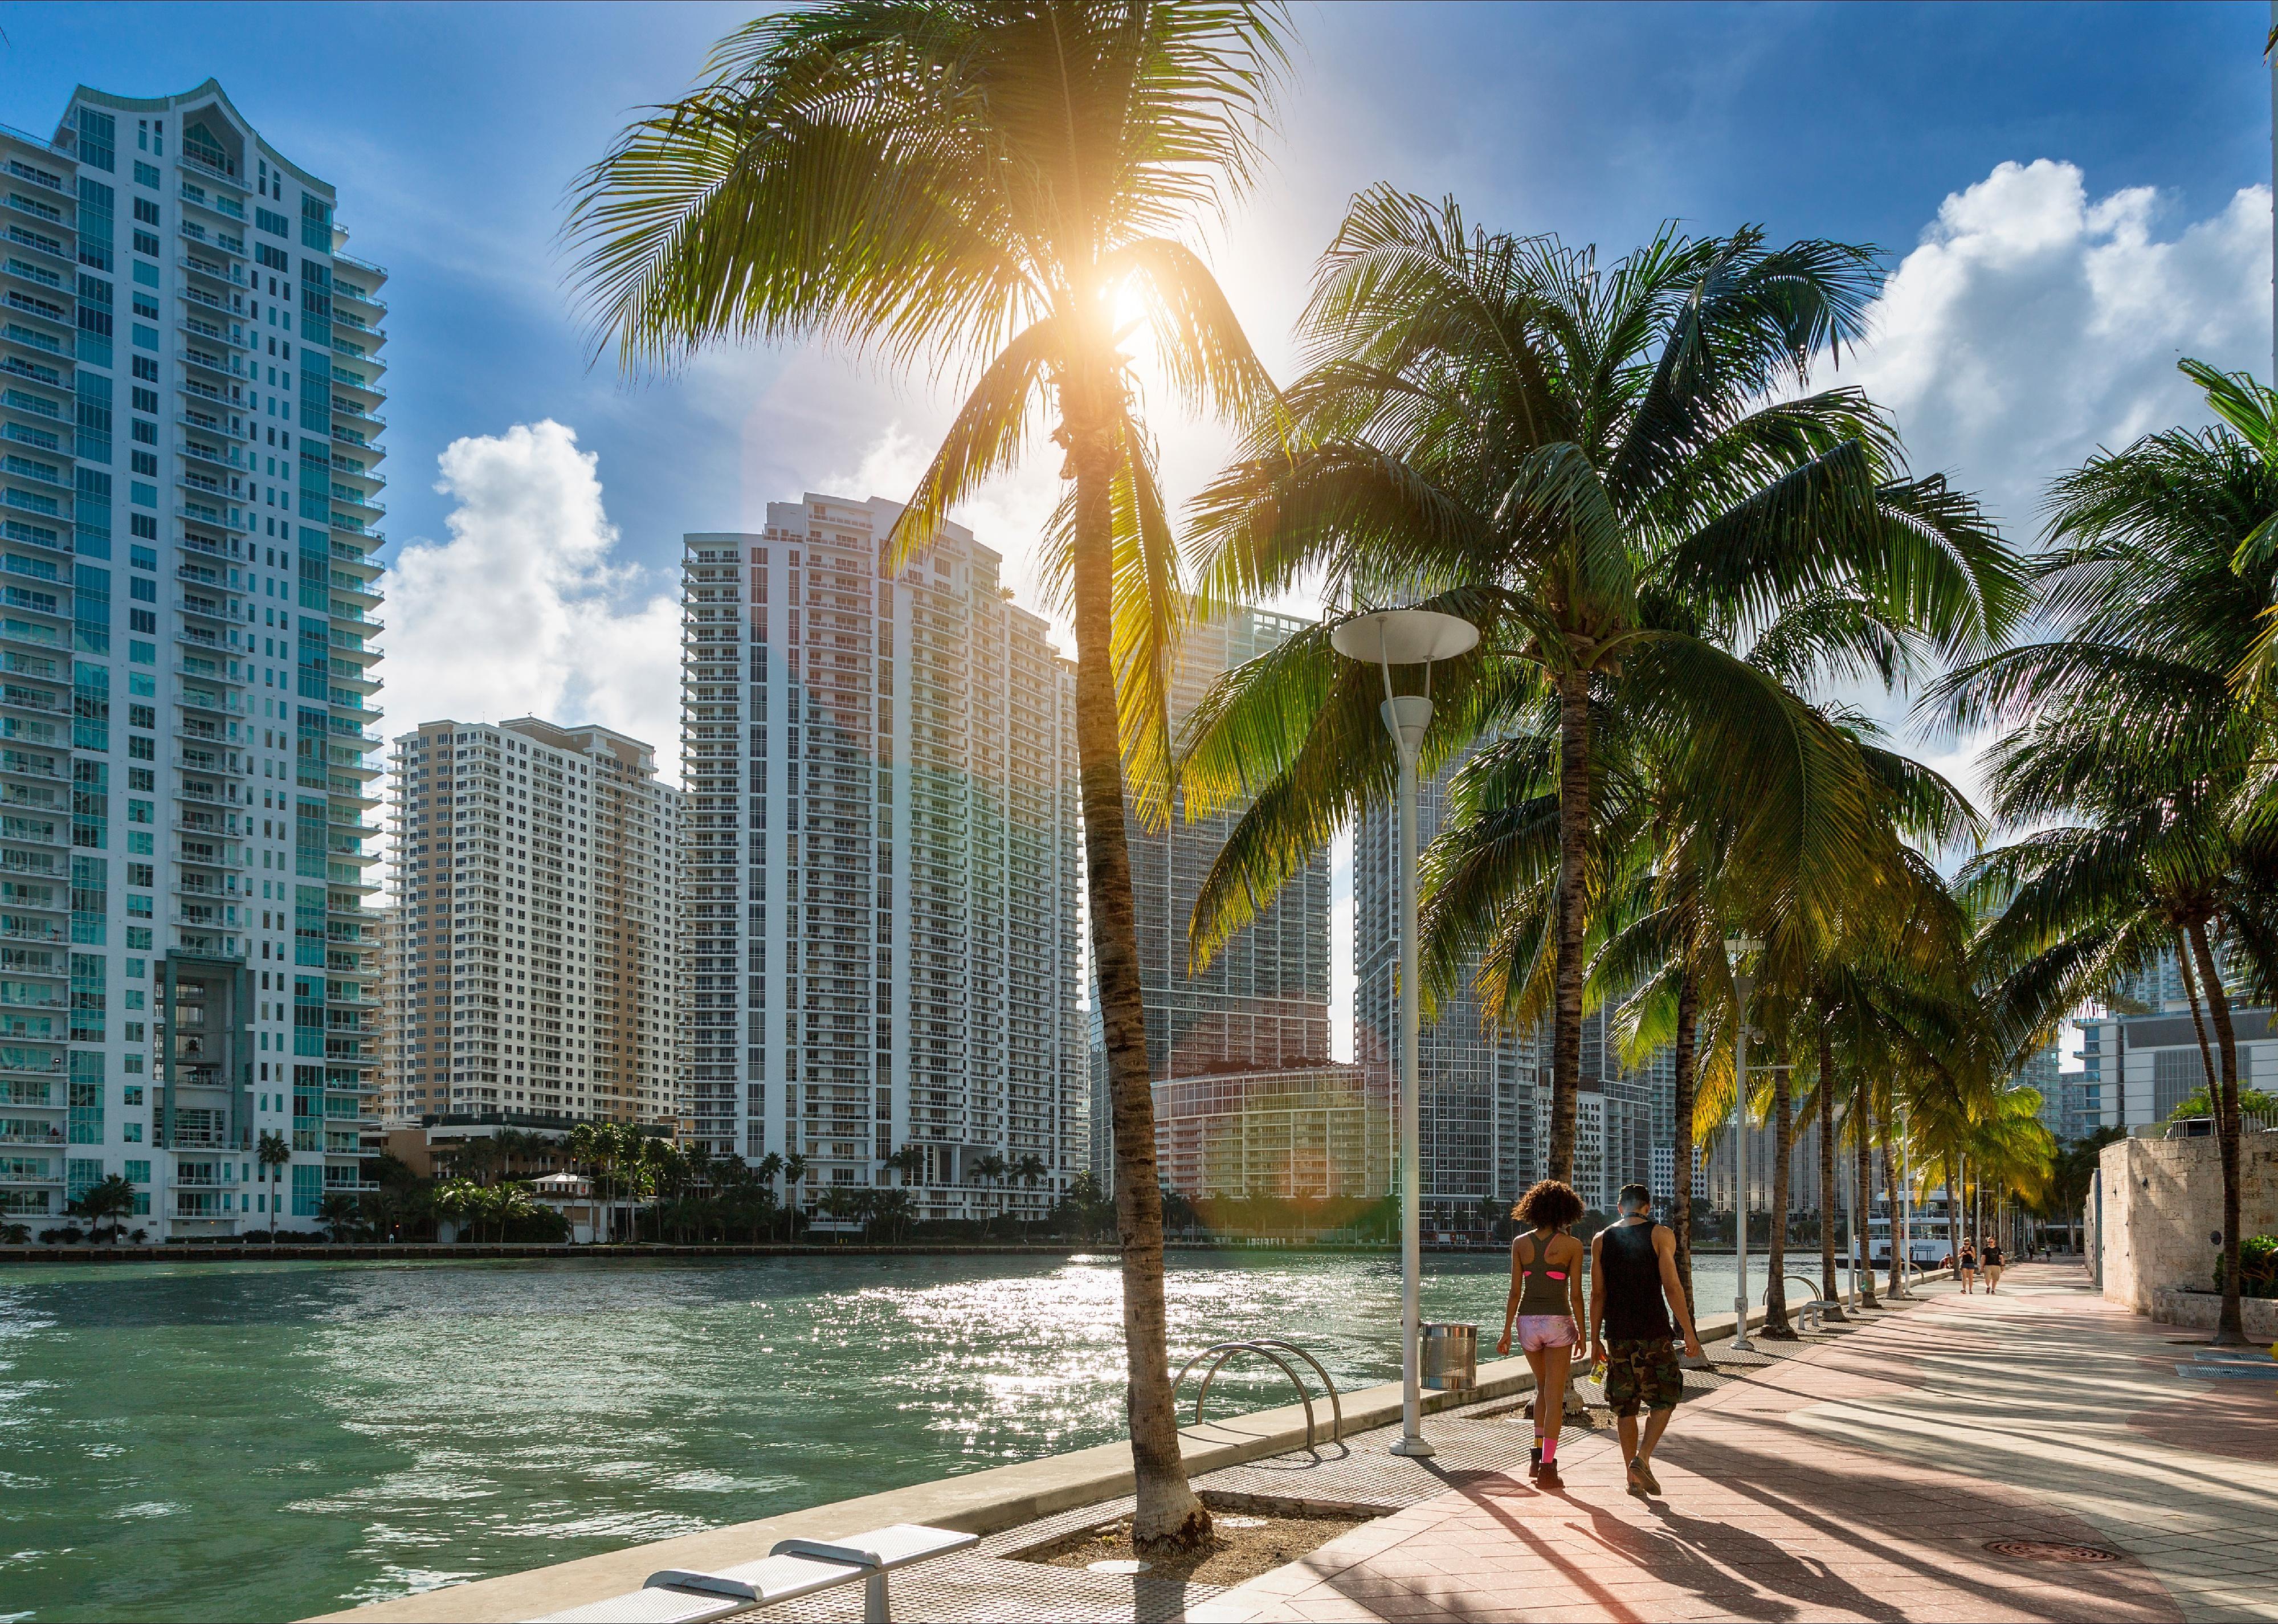 Condos and apartments line the Miami waterfront.